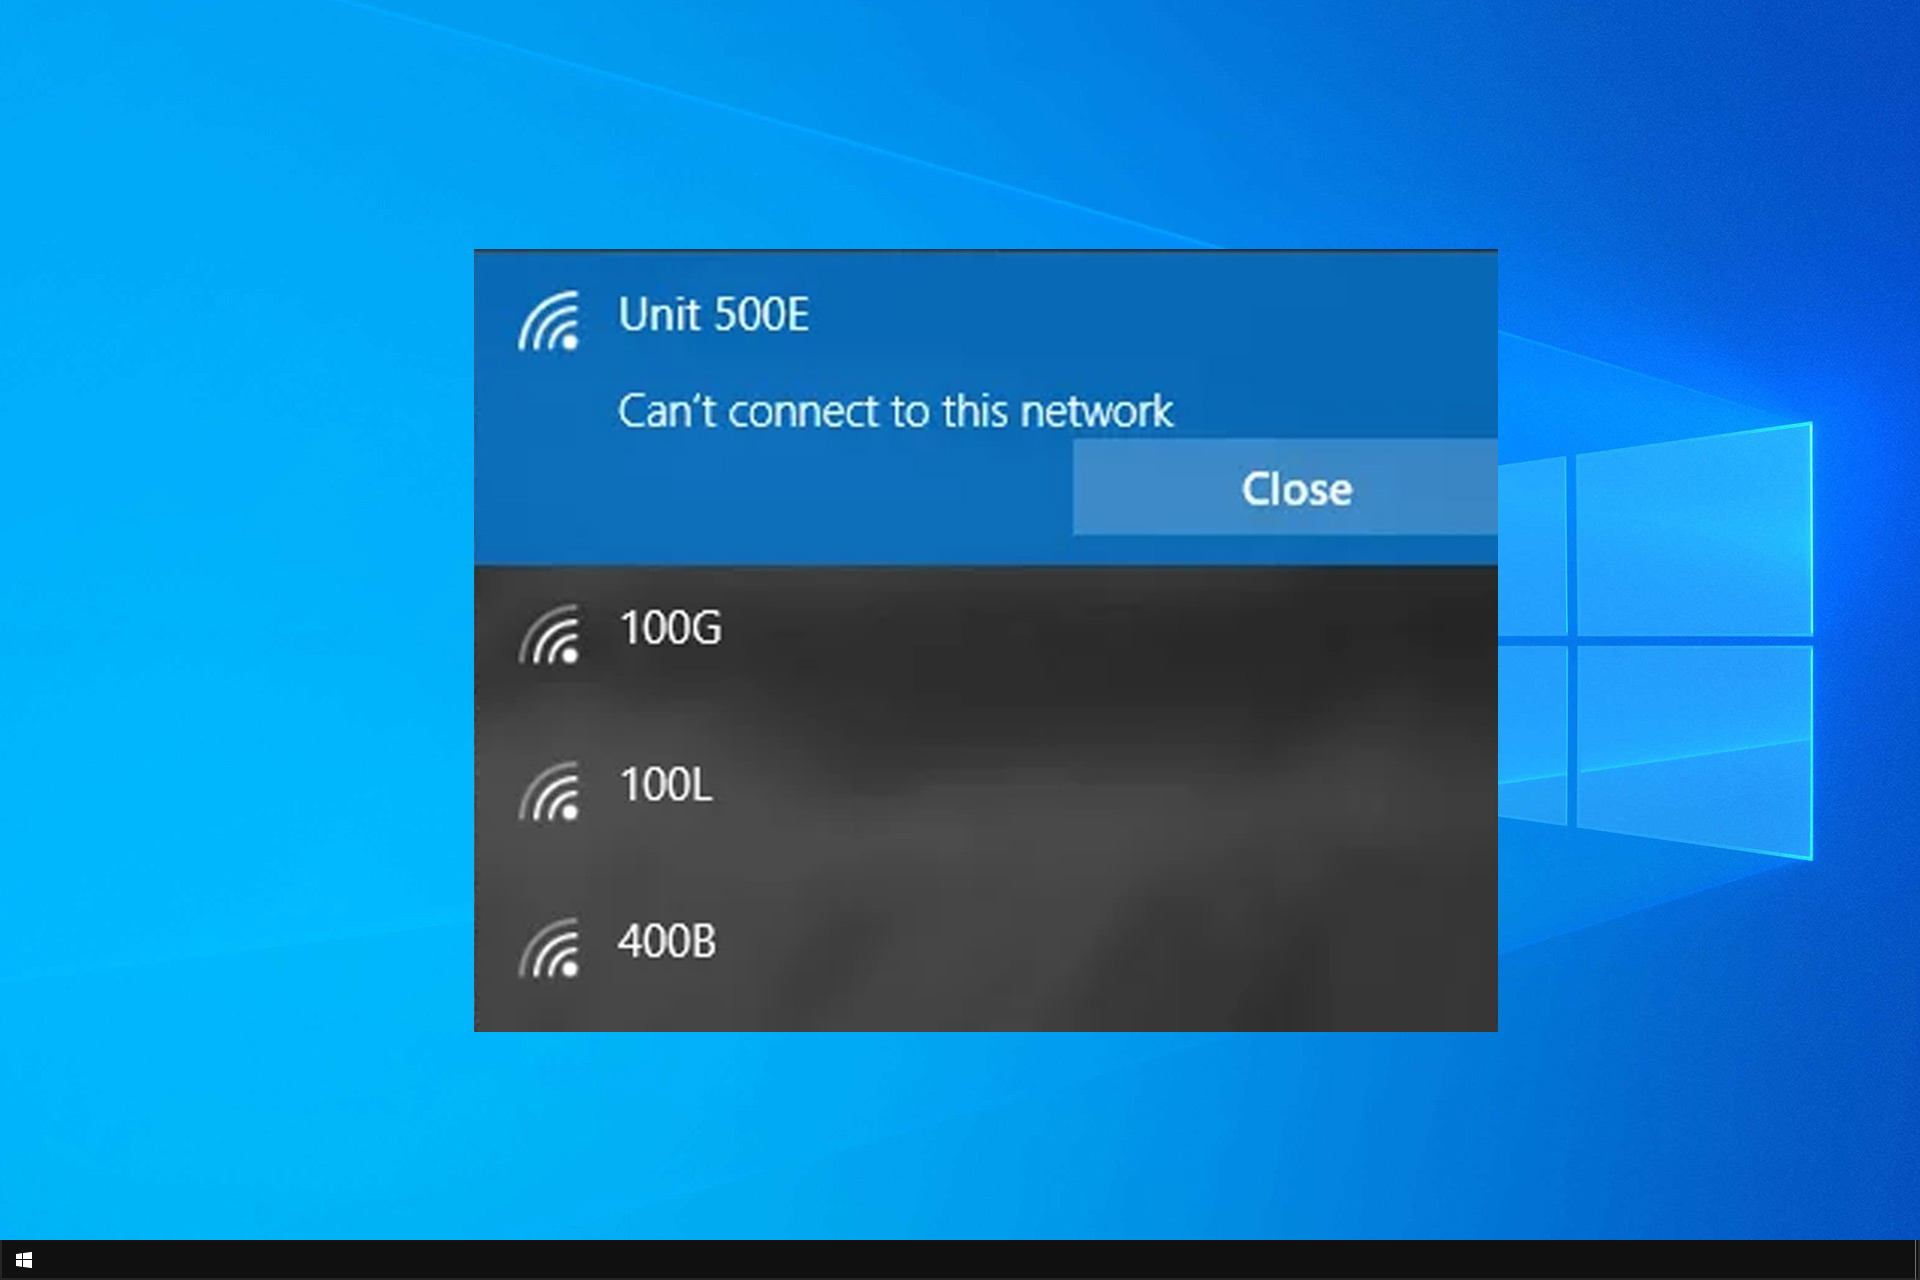 surface pro 3 can't connect to this network